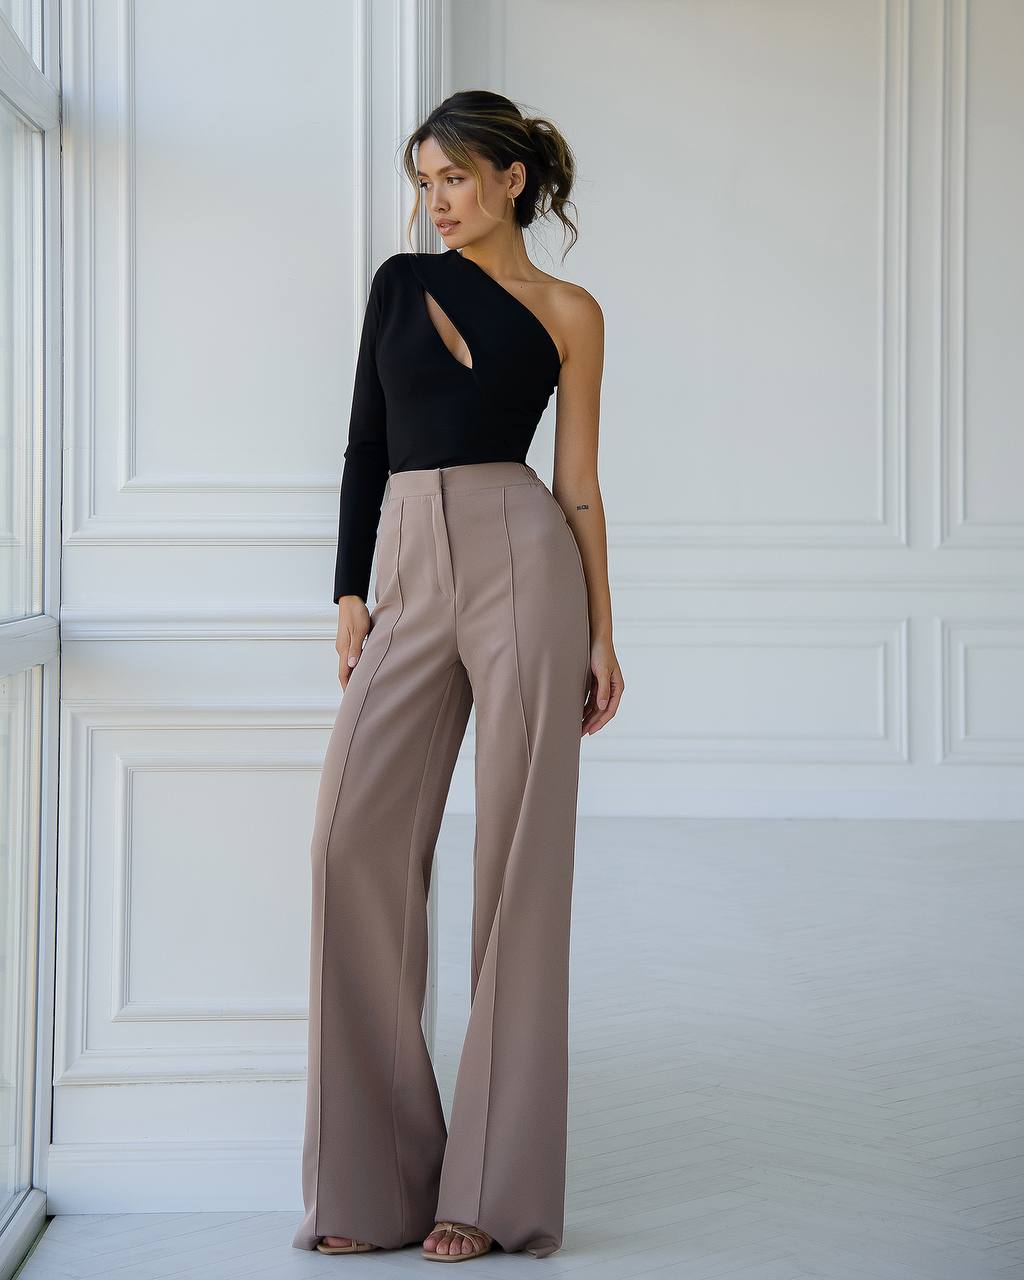 a woman in a black top and tan pants